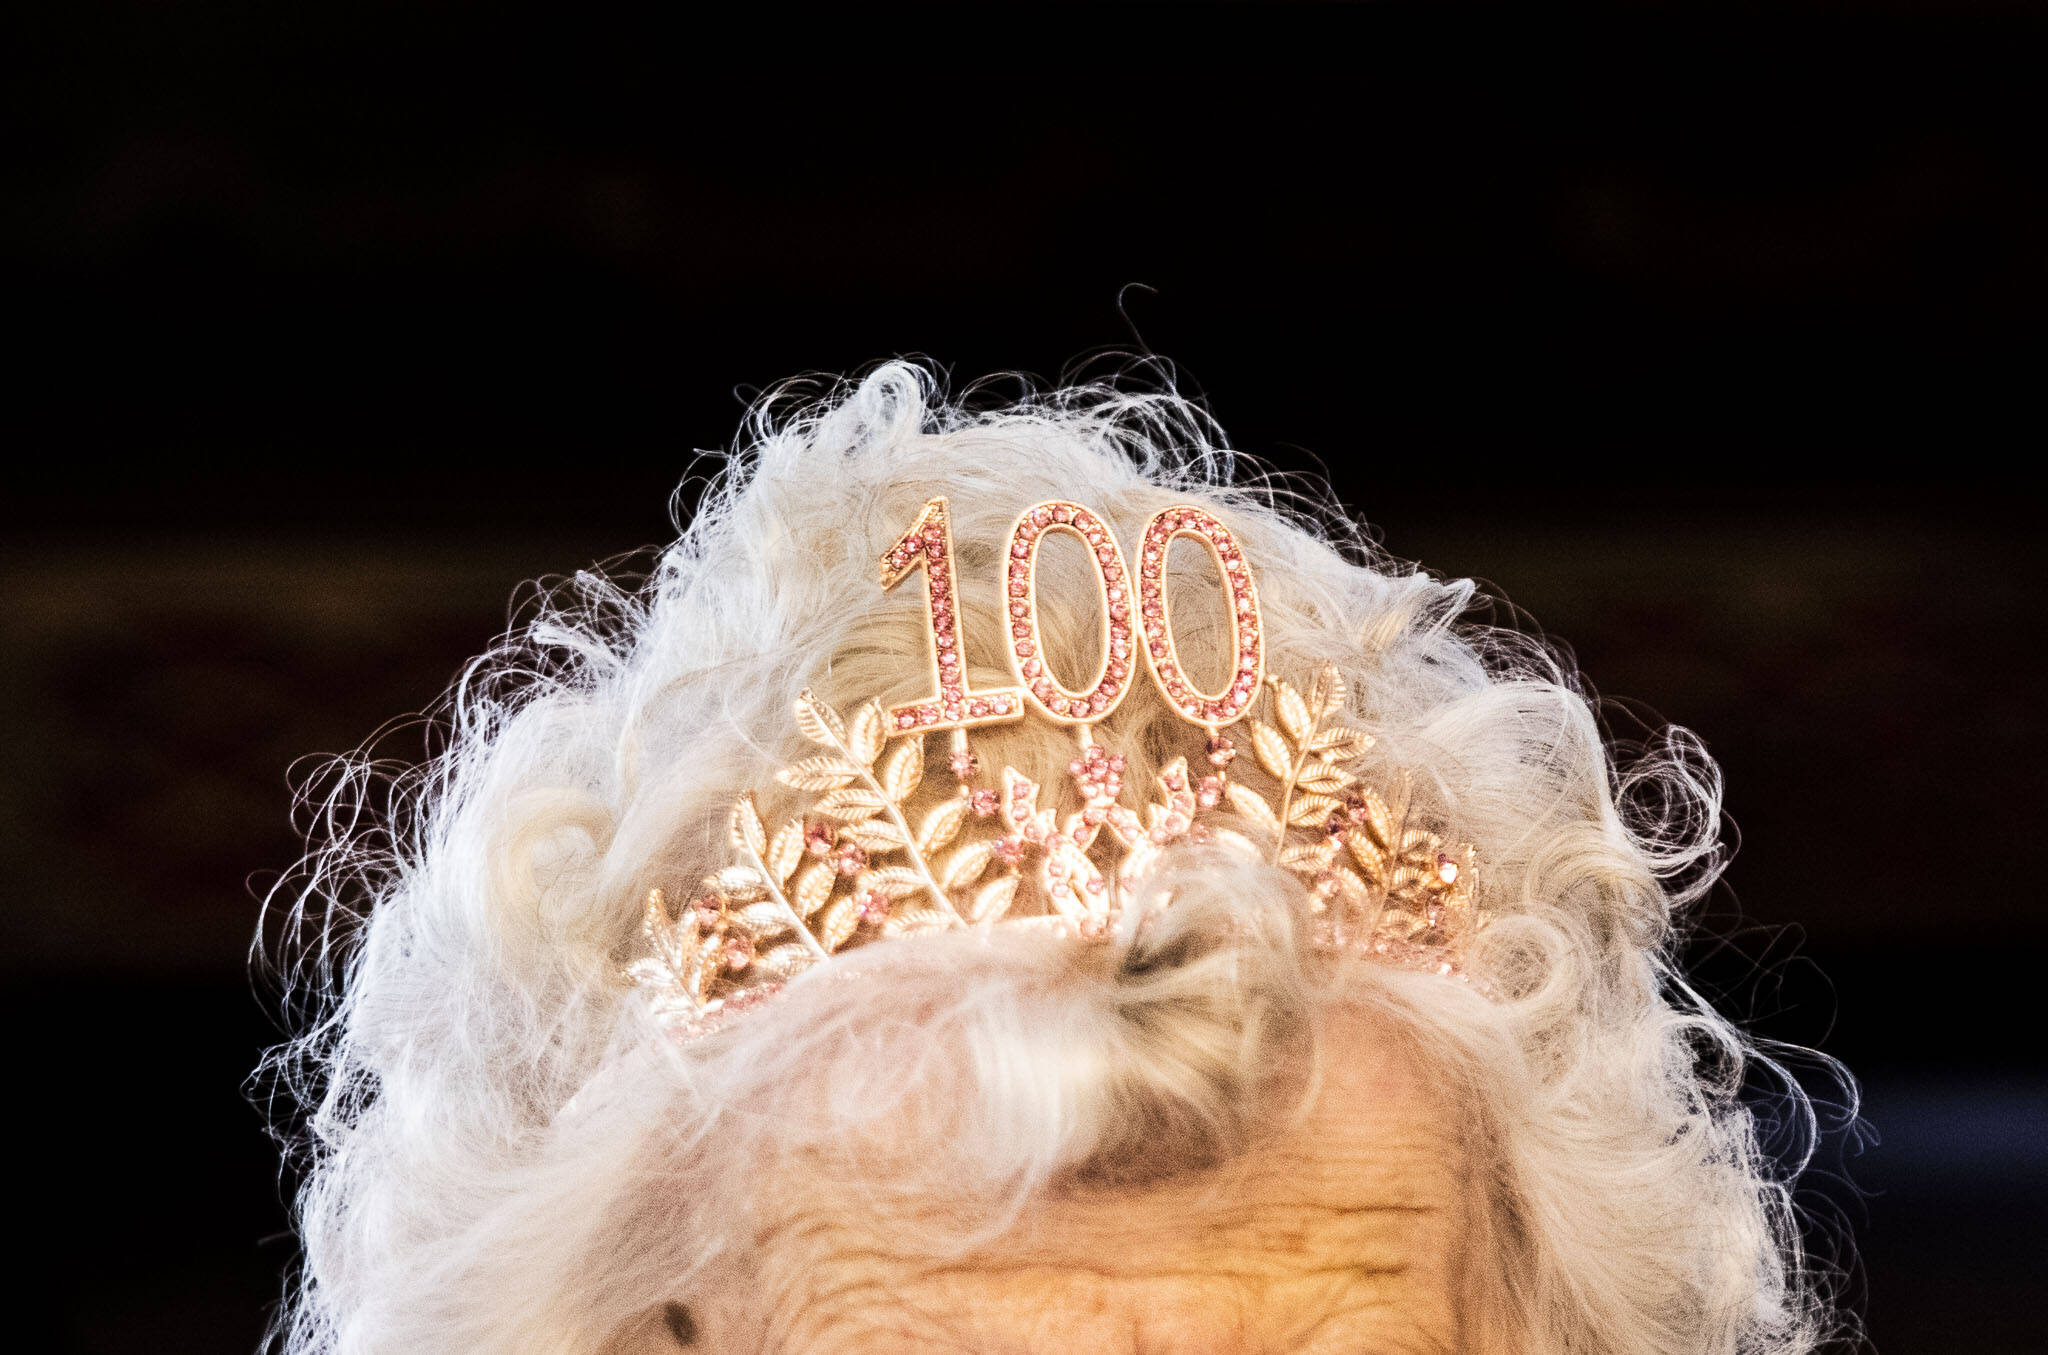 Ferne Ullestad donned a 100th birthday tiara at her celebration. (Olivia Vanni / The Herald)